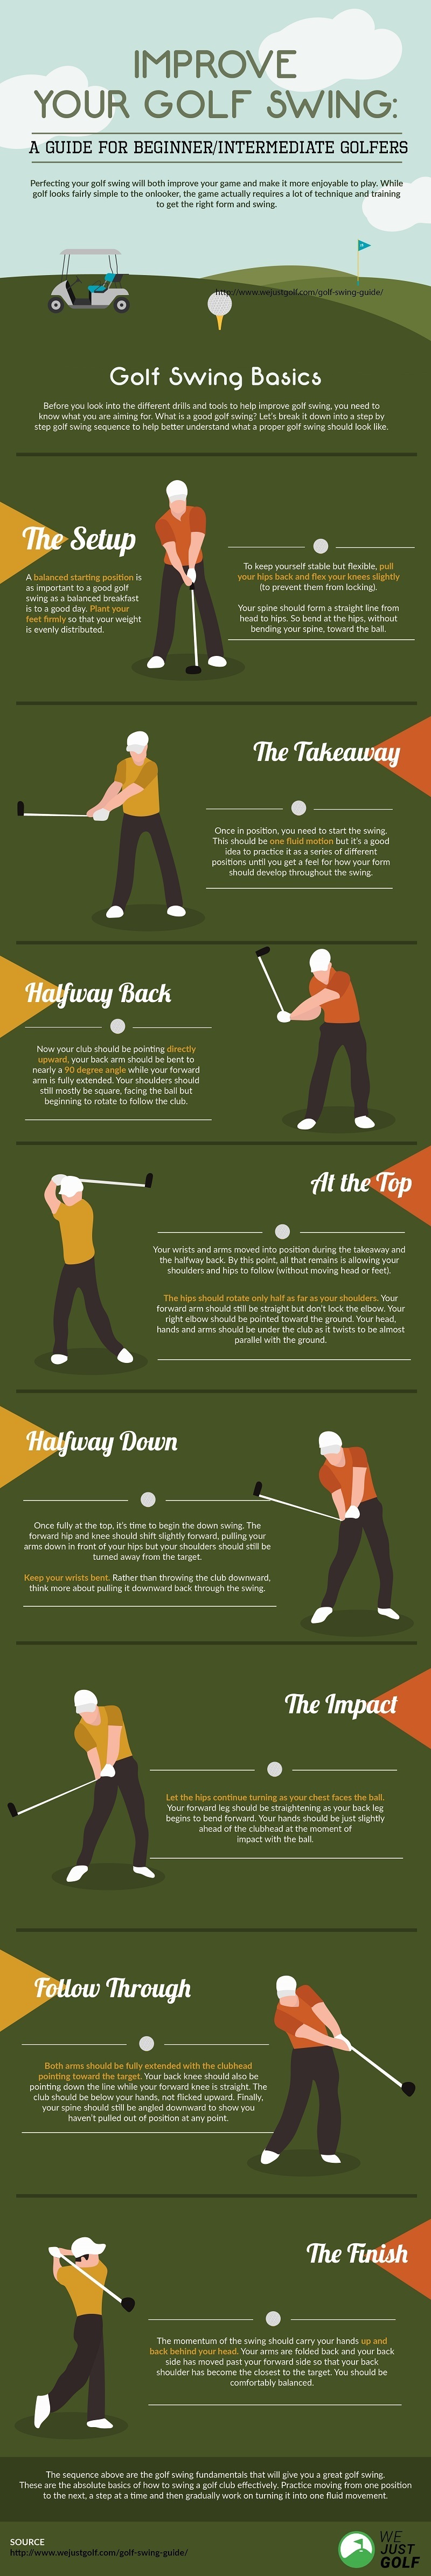 Guide To Improve Your Golf Swing